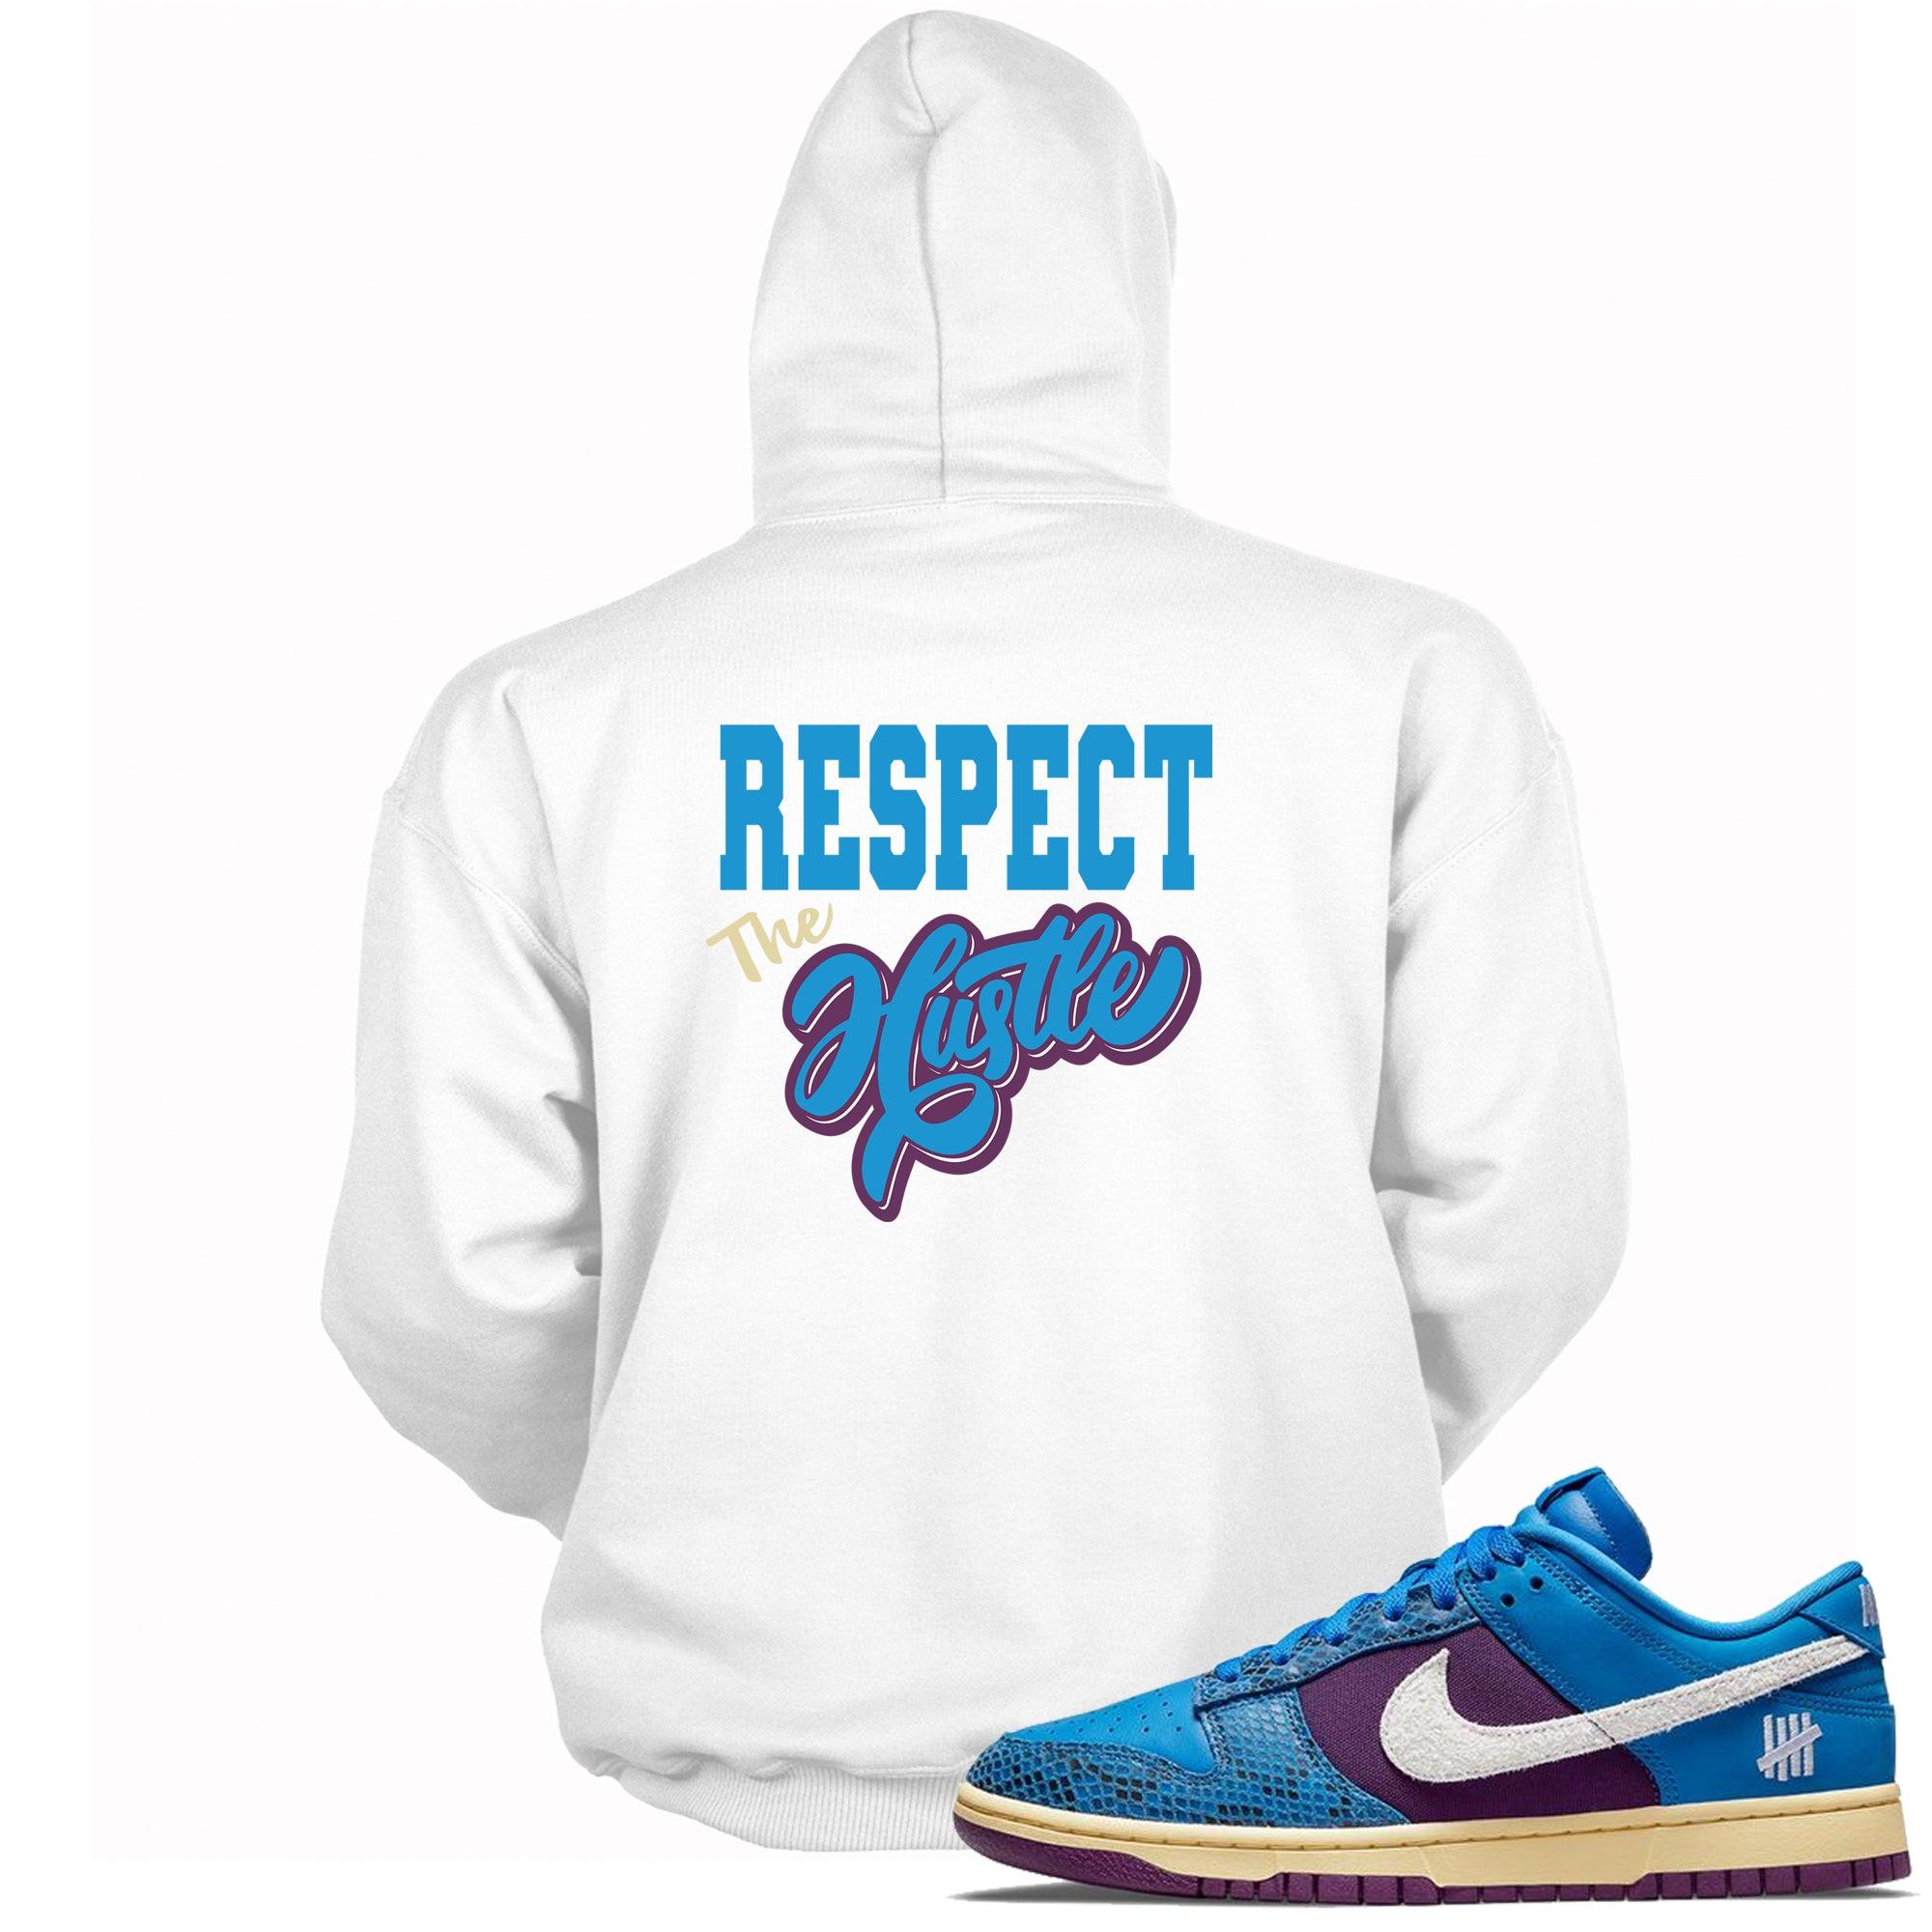 Respect The Hustle Hoodie Nike Dunk Low Undefeated 5 On It Dunk vs AF1 photo